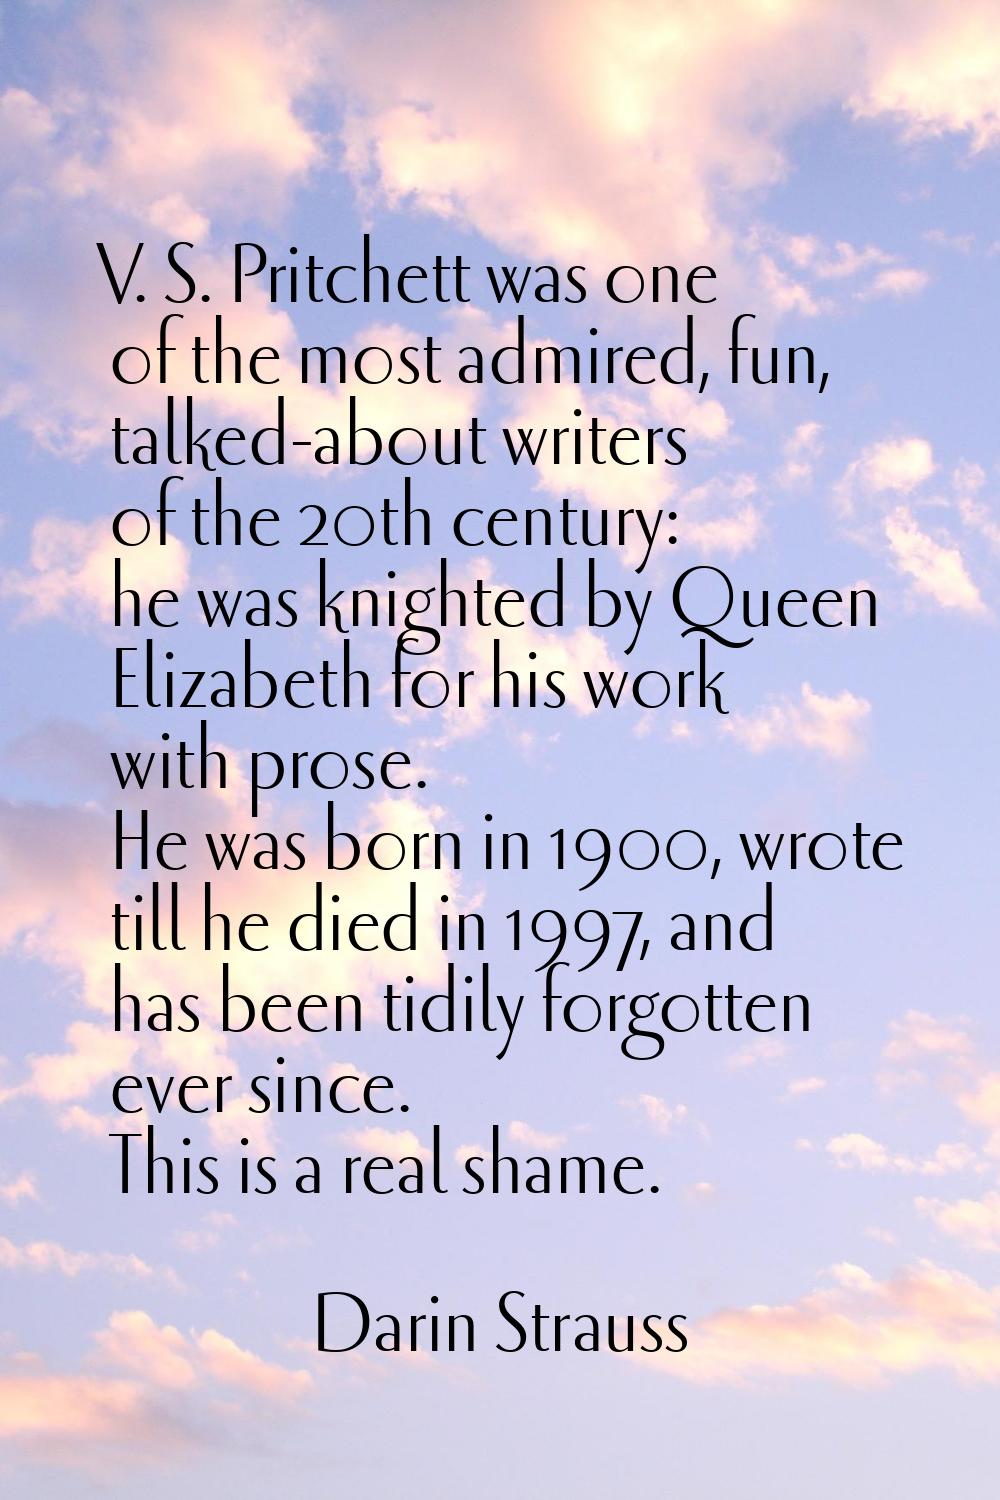 V. S. Pritchett was one of the most admired, fun, talked-about writers of the 20th century: he was 